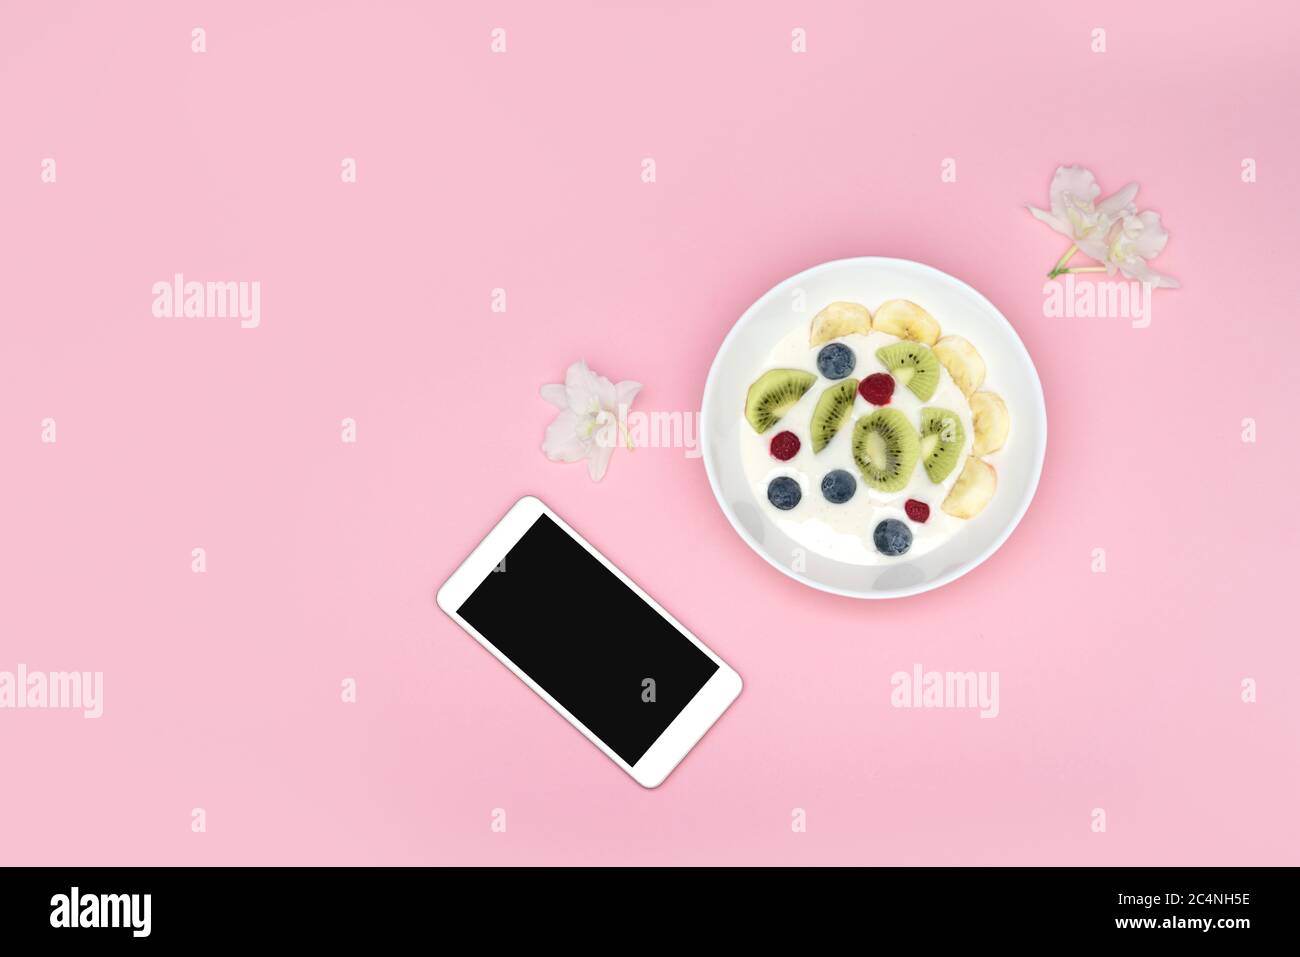 A smoothie bowl with superfoods and a phone on a pink background. Yogurt with blueberries, kiwi, banana and cereal. View from above. Stock Photo